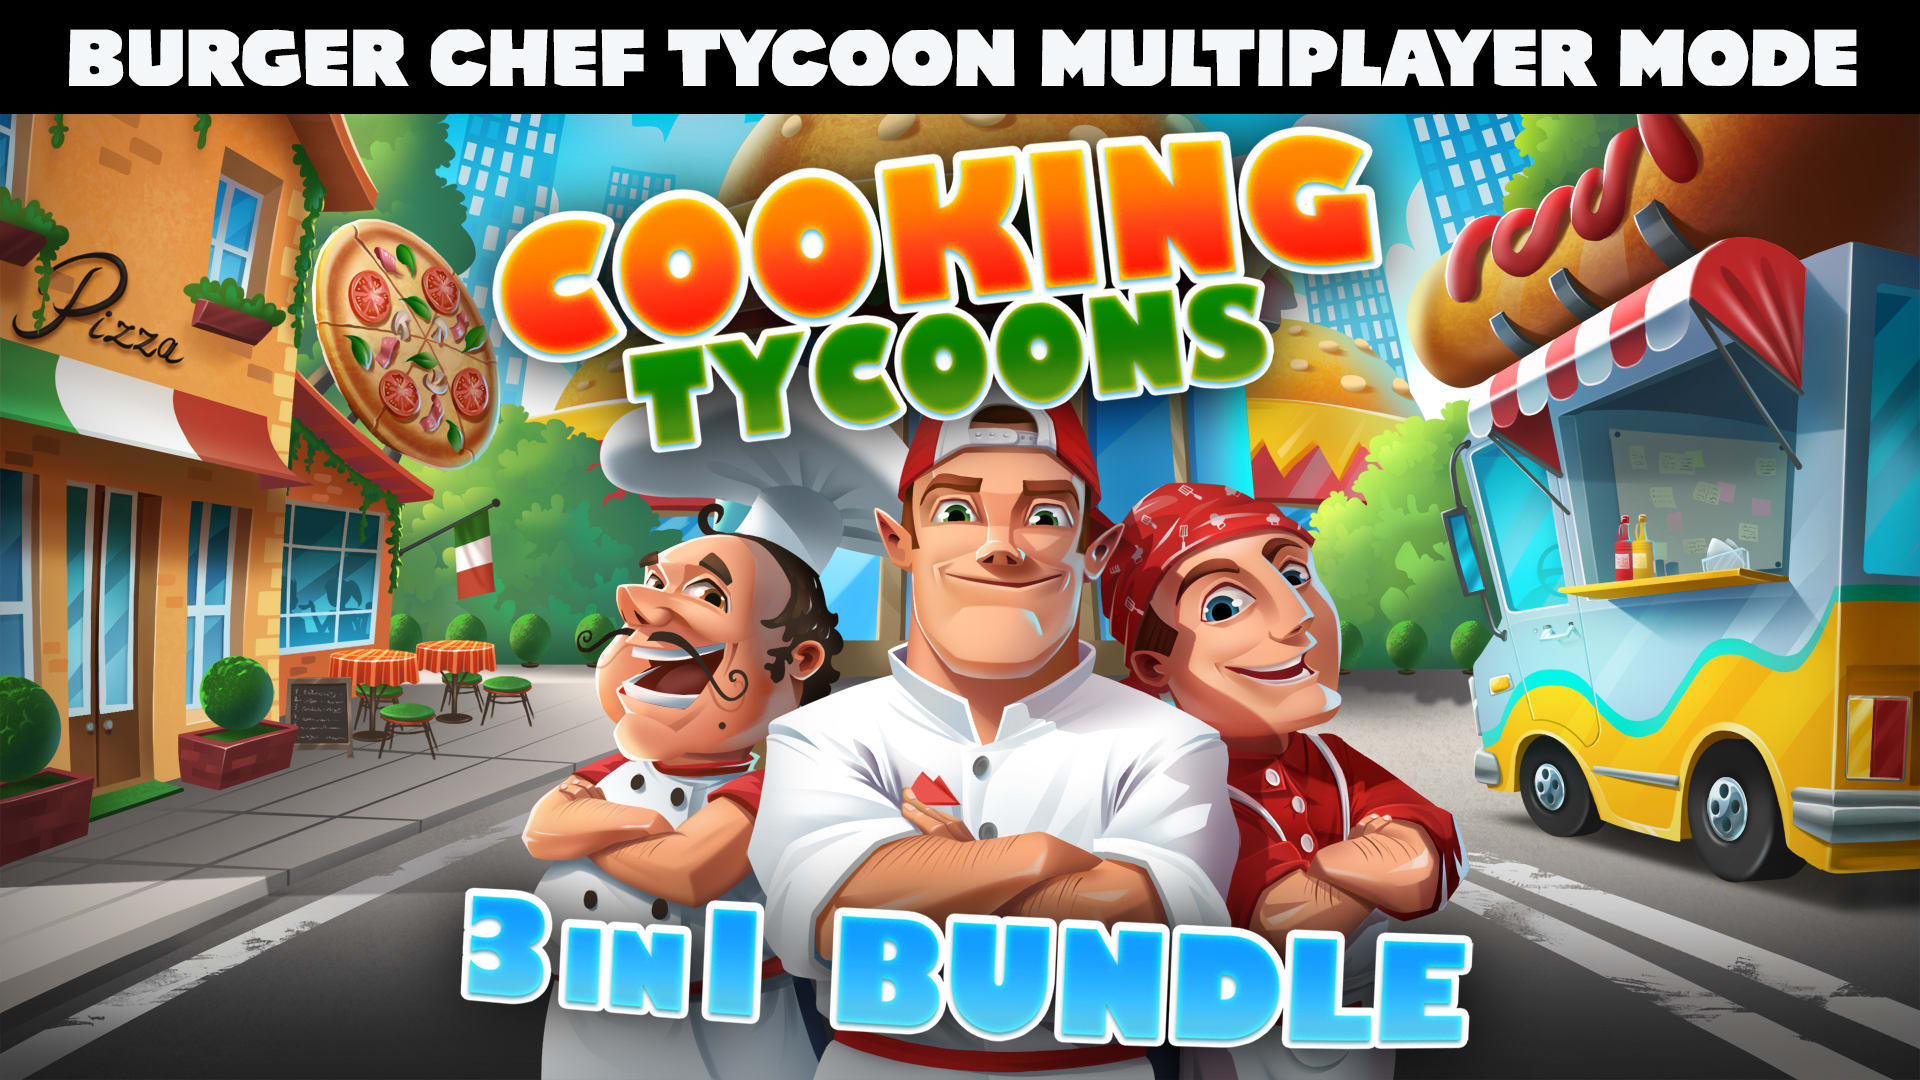 Cooking Tycoons: 3 in 1 Bundle - Burger Chef Tycoon Multiplayer Mode 1